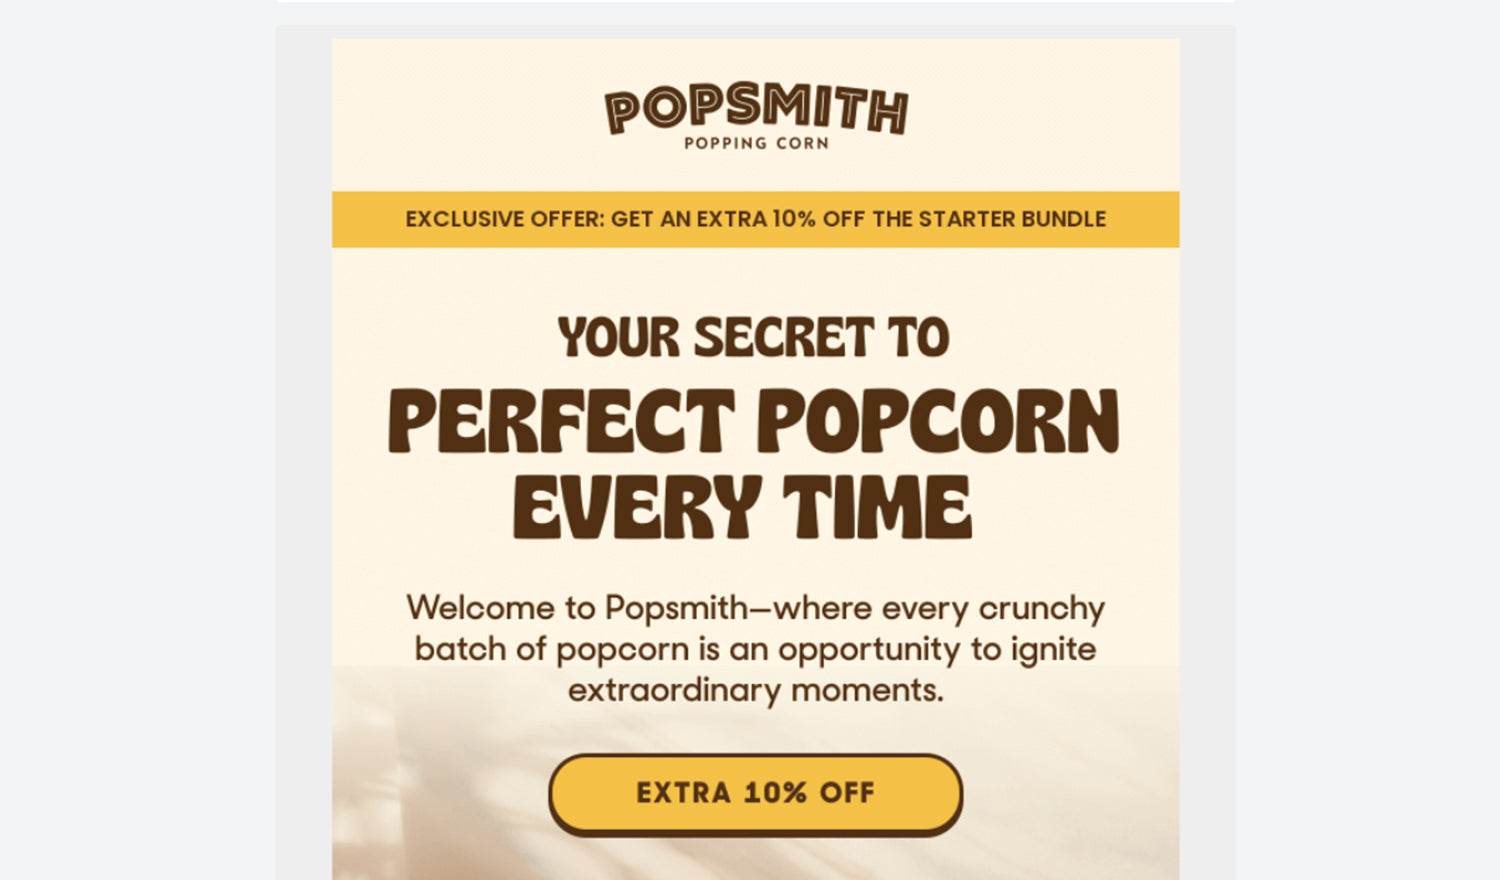 An example of a welcome email sent by Popsmith, offering 10% off a starter bundle.